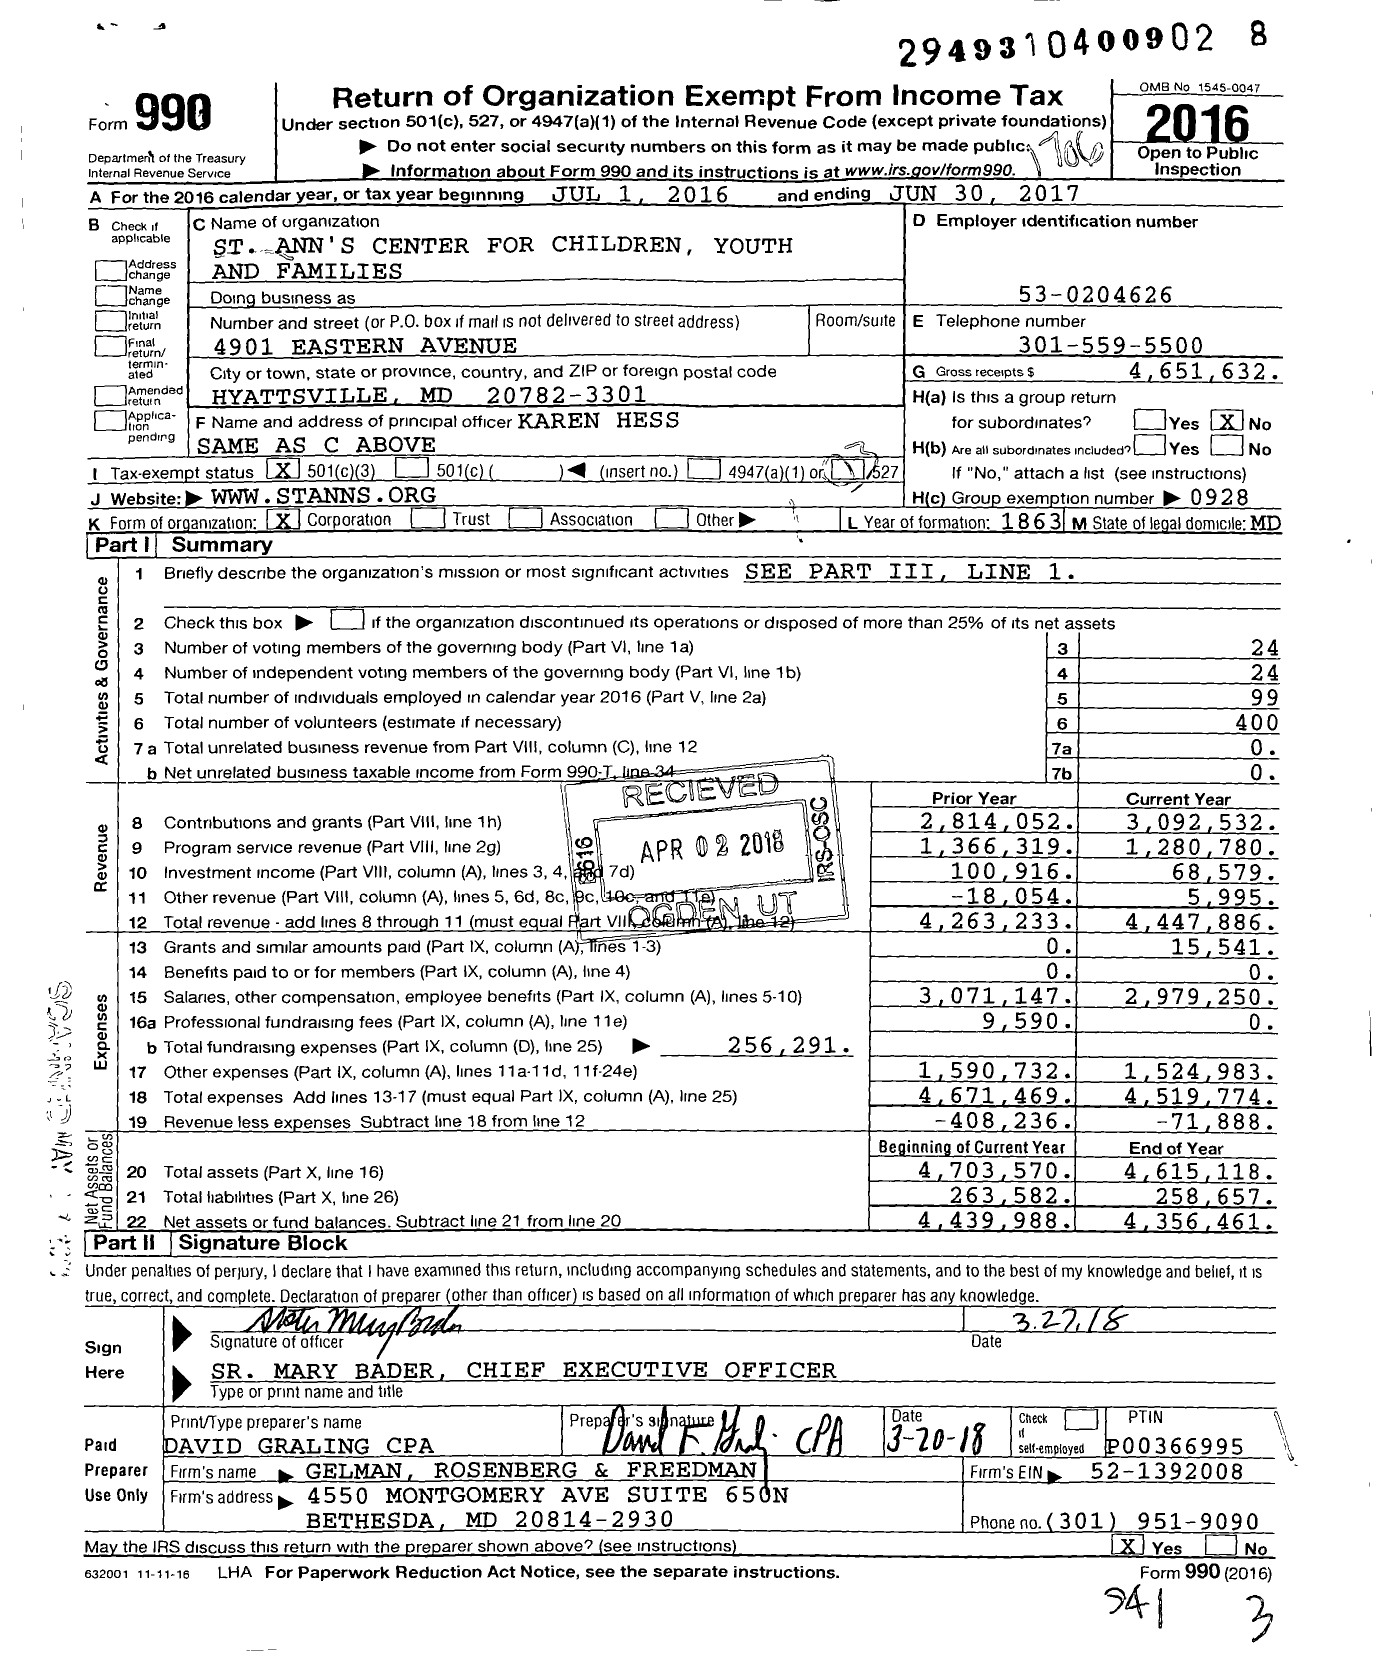 Image of first page of 2016 Form 990 for St Ann's Center for Children Youth and Families